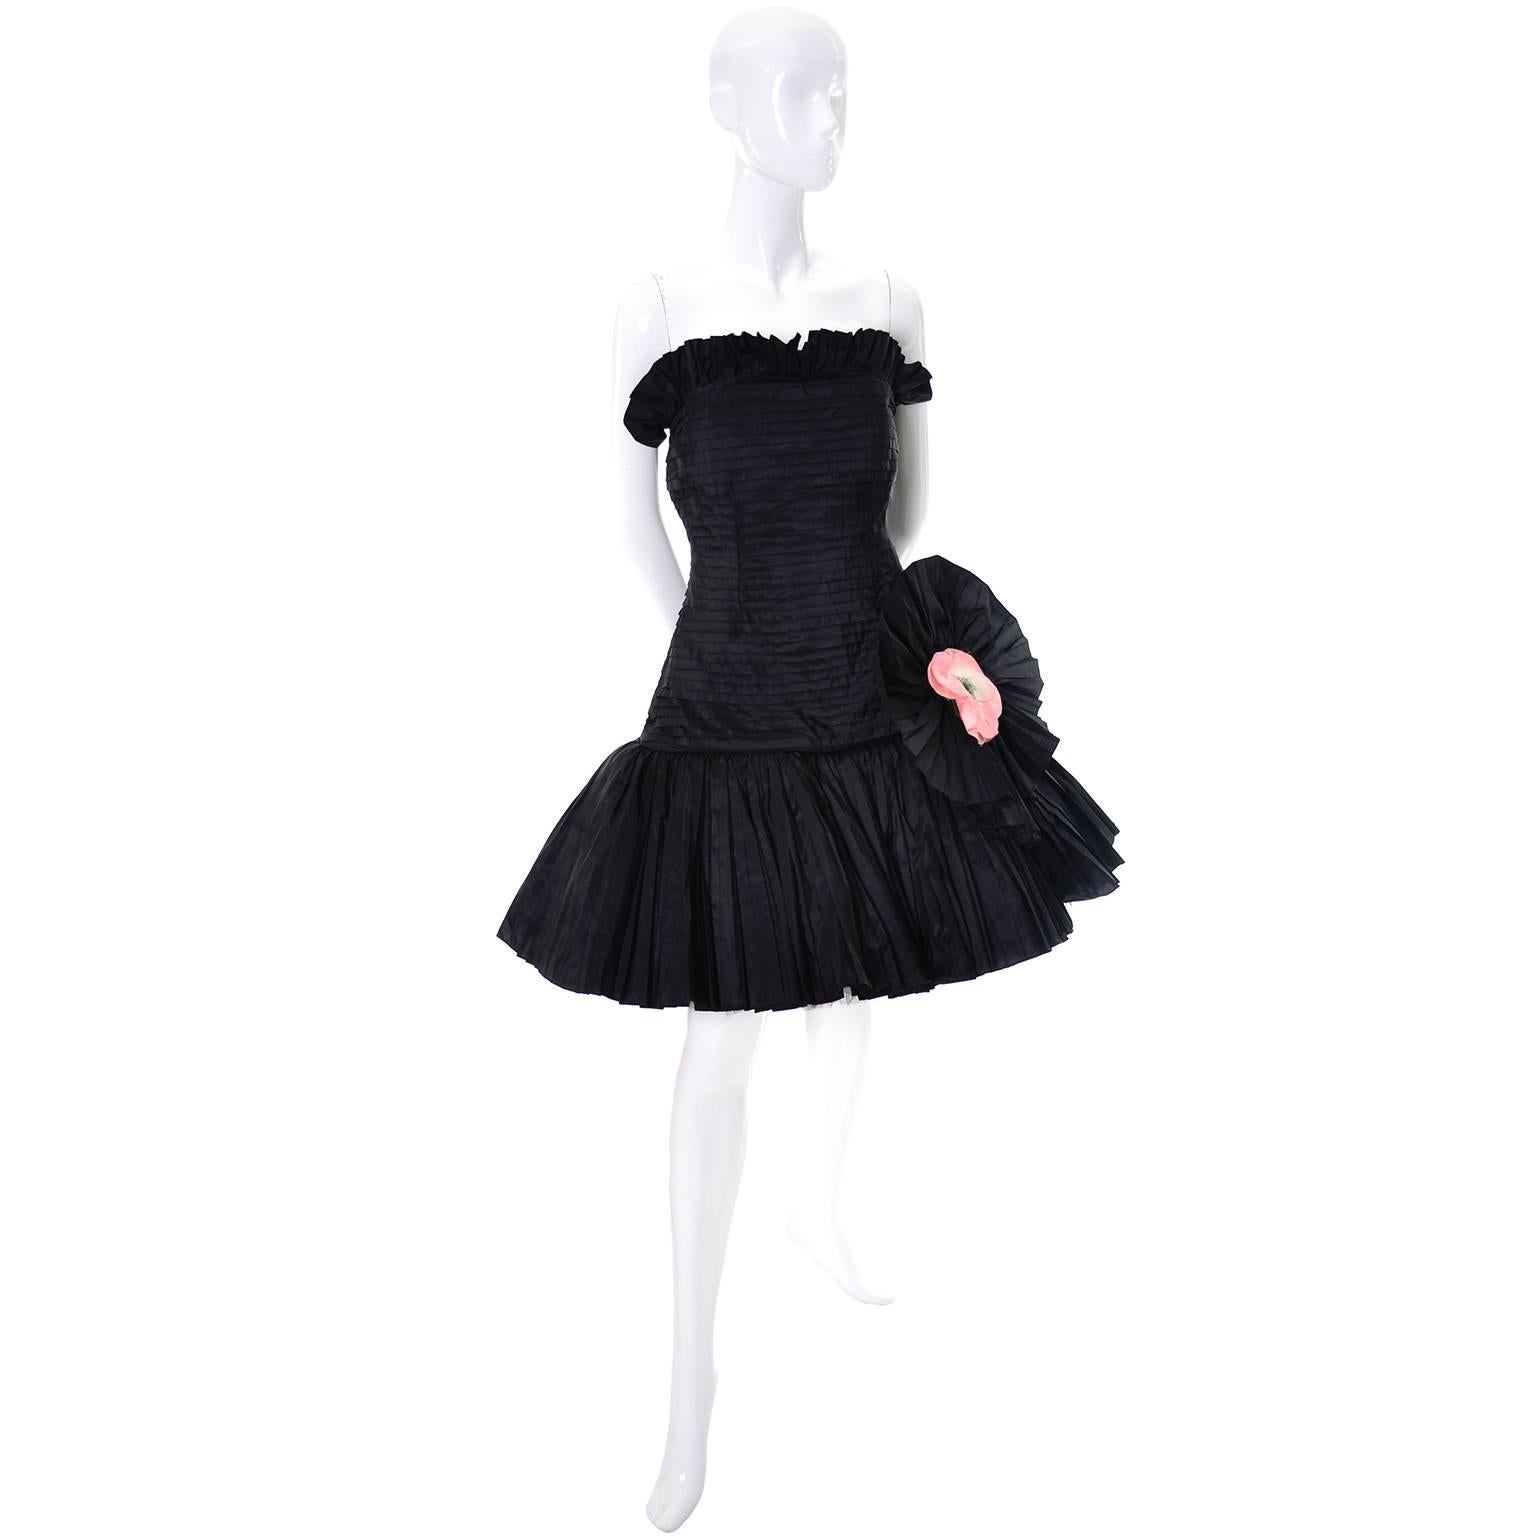 This is a stunning black vintage dress from Oscar de la Renta from the 1980's.  The dress is strapless and beautifully pleated horizontally with a back zipper. The dress is labeled a size 10 but please use the measurements I've included for the best